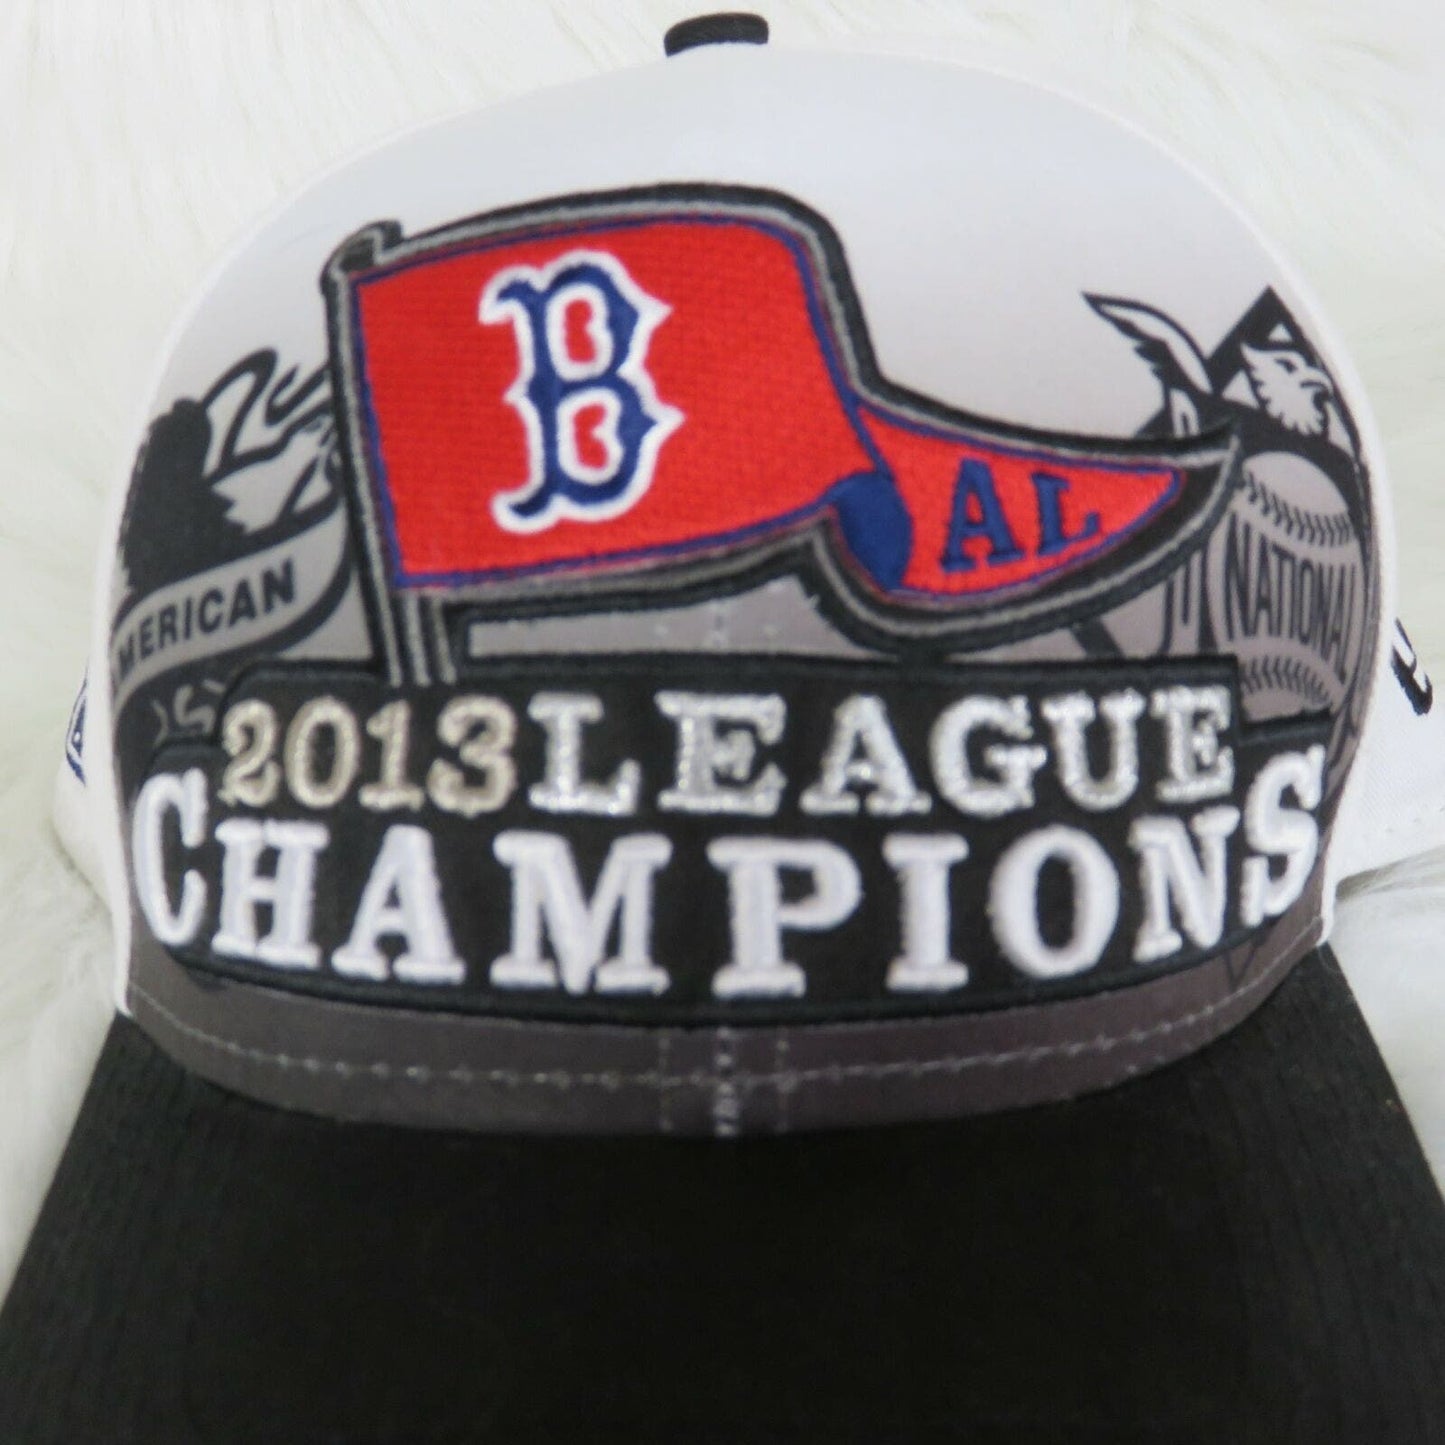 New Era Boston Red Sox League Champions Fitted Baseball Hat - Men's Size 7 5/8